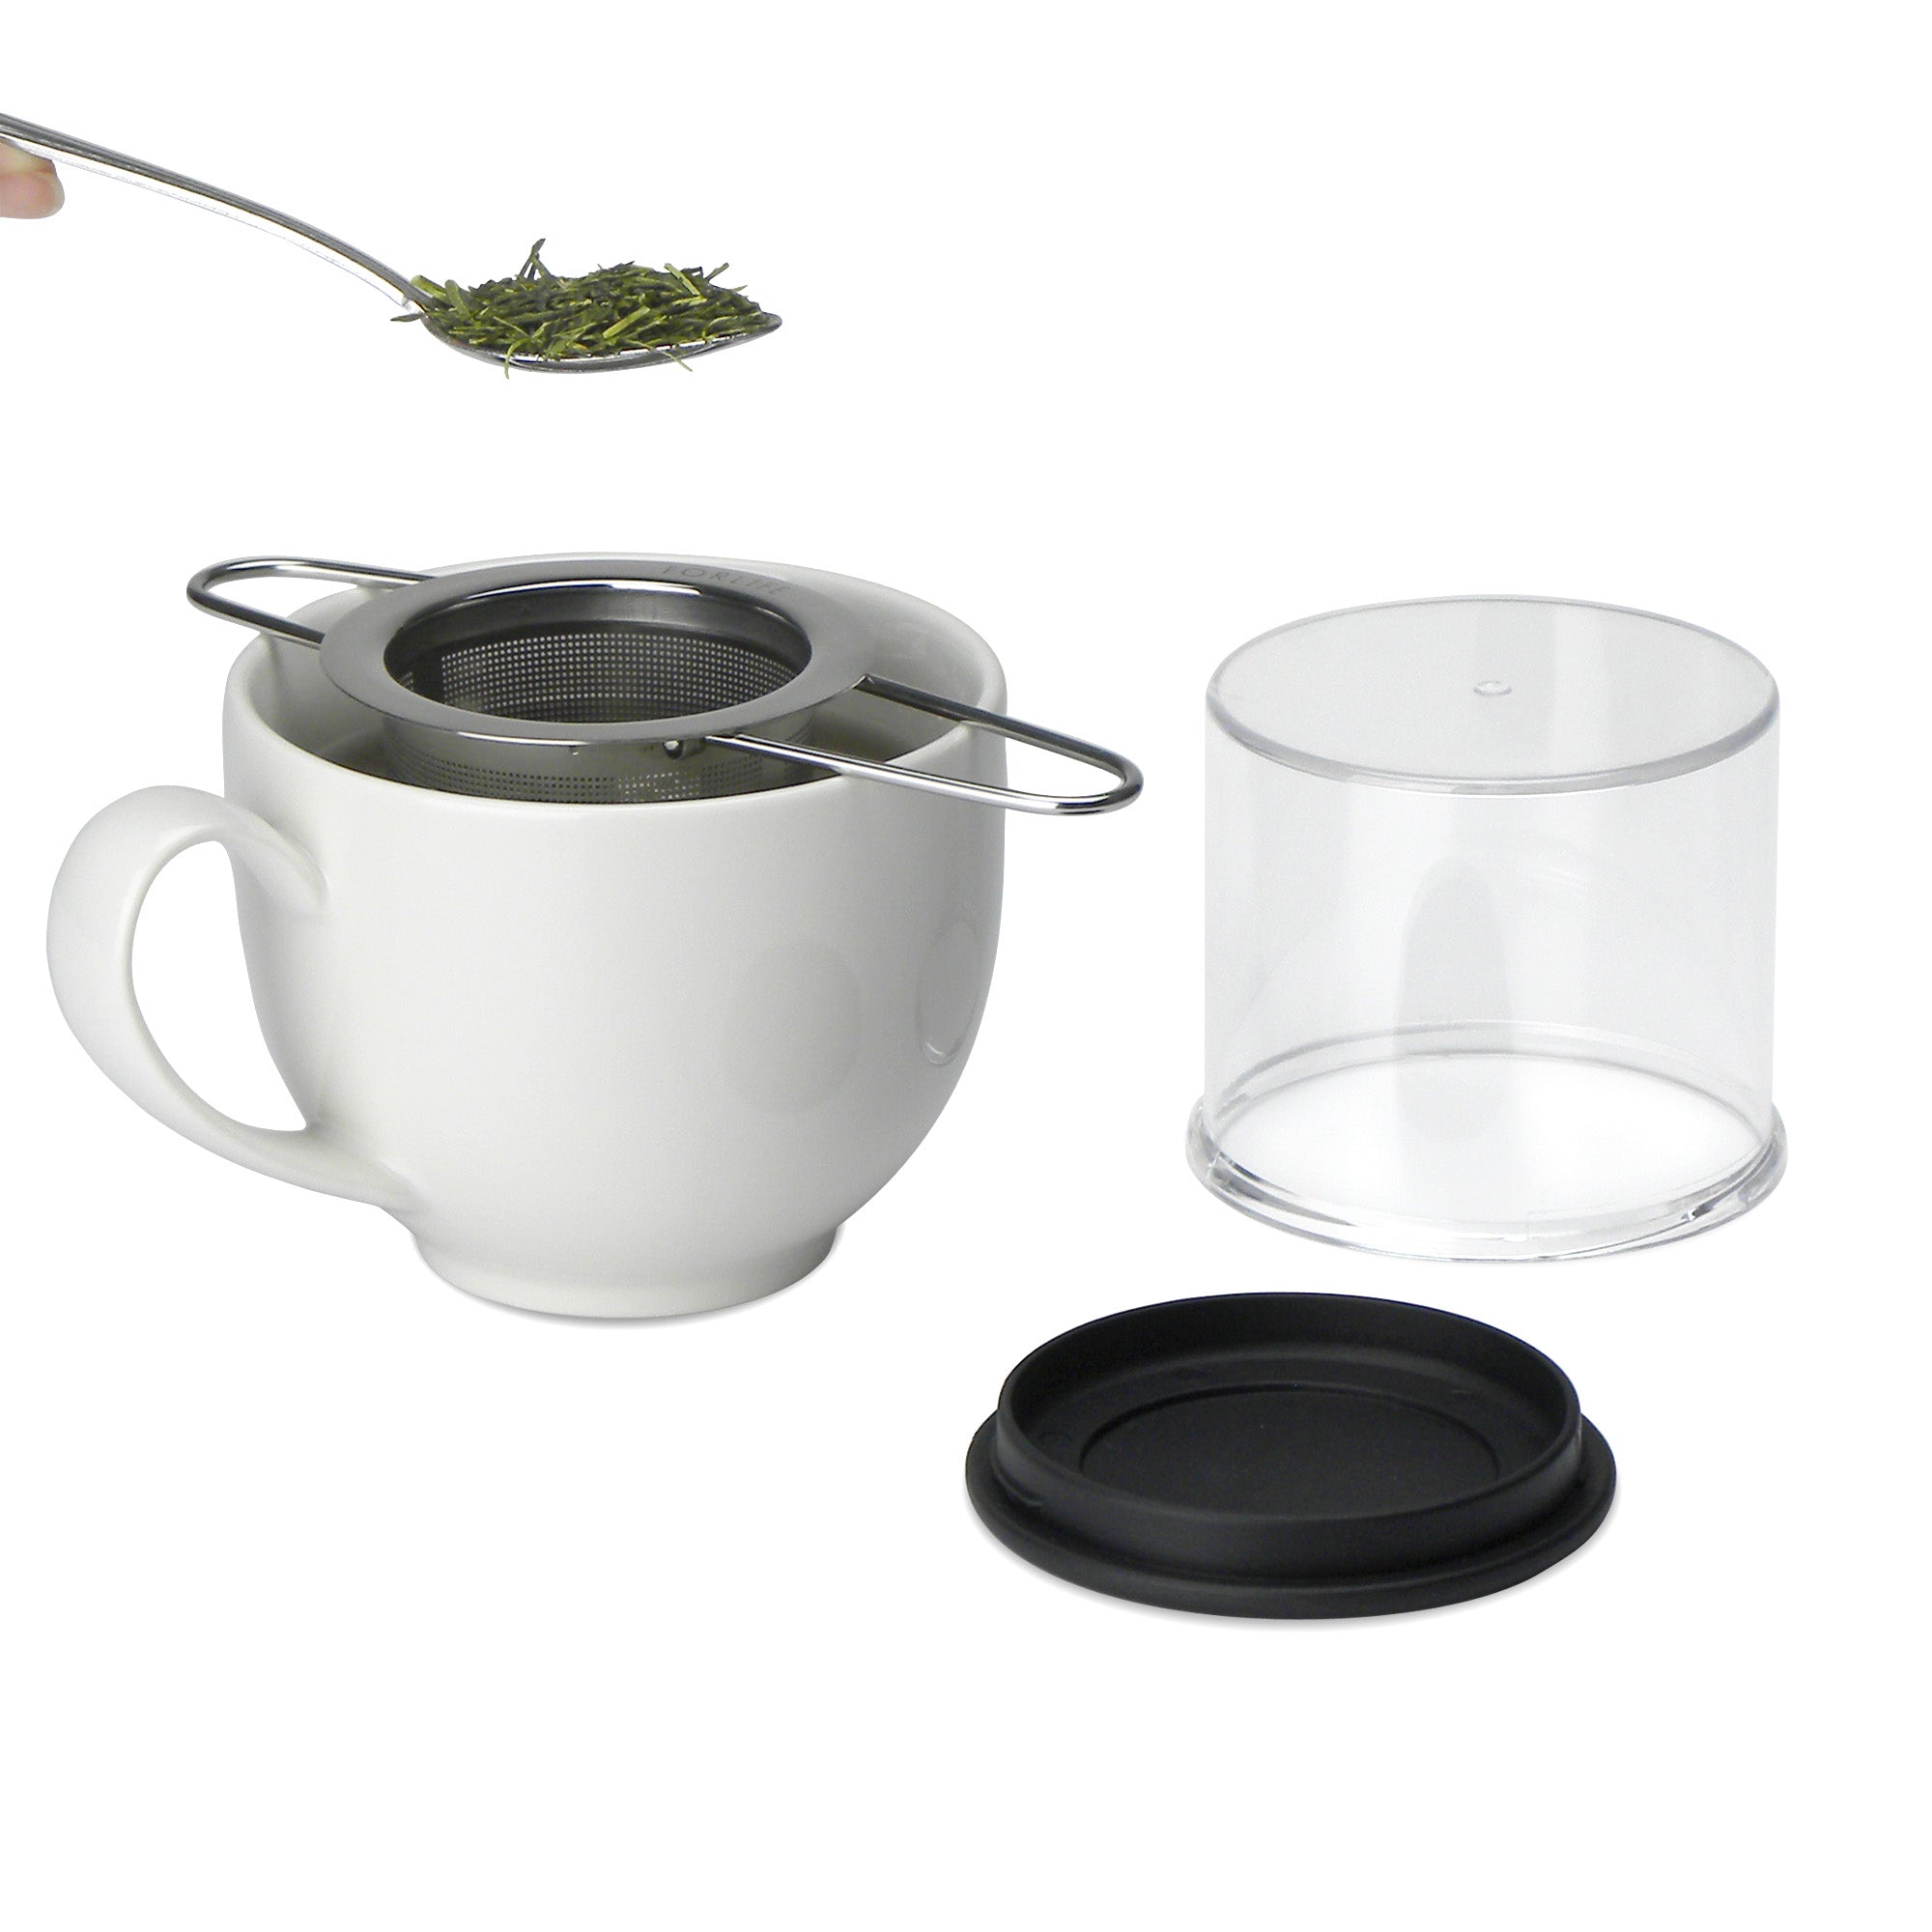 Folding Handle Tea Infuser with Carrying Case (Set of 6)